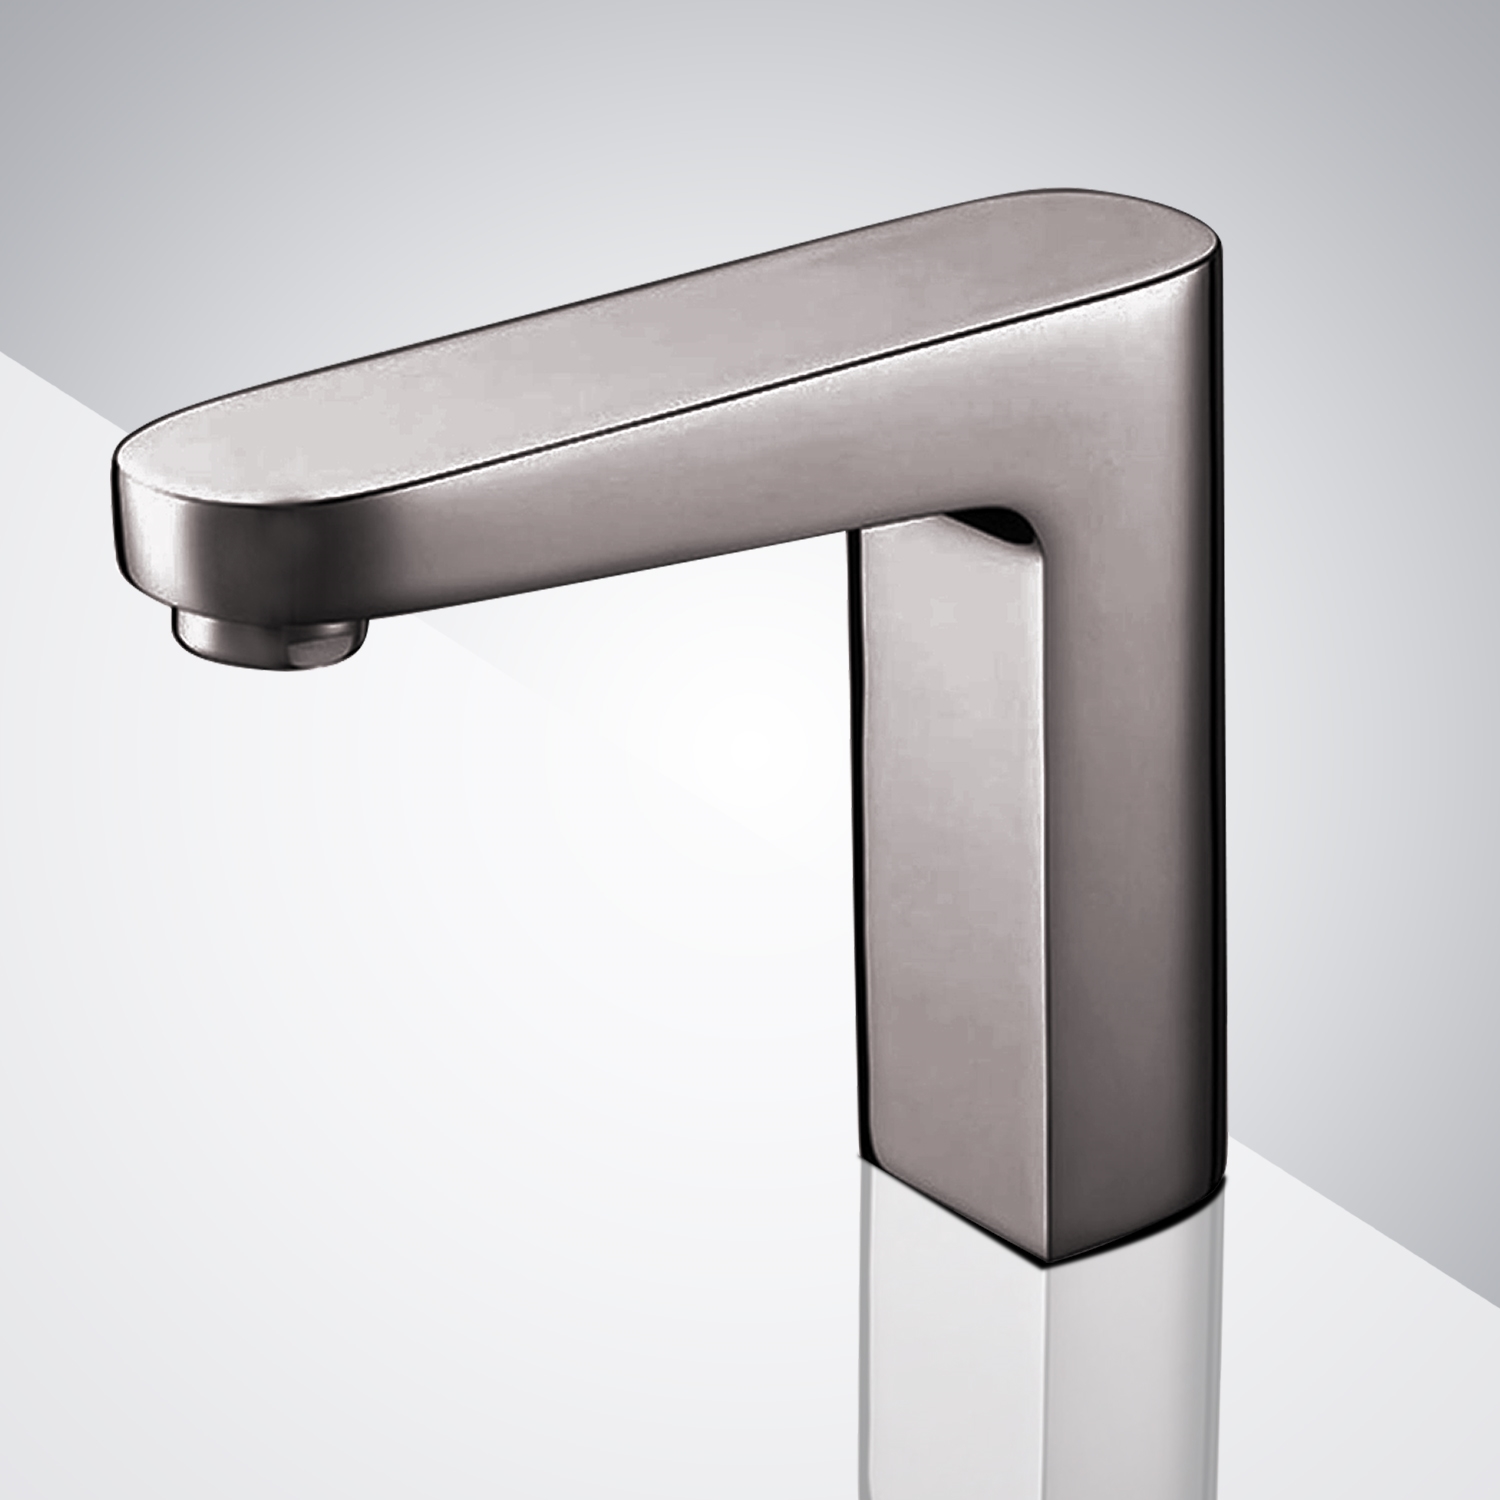 Velagio Windowless Capacitive Touchless faucet